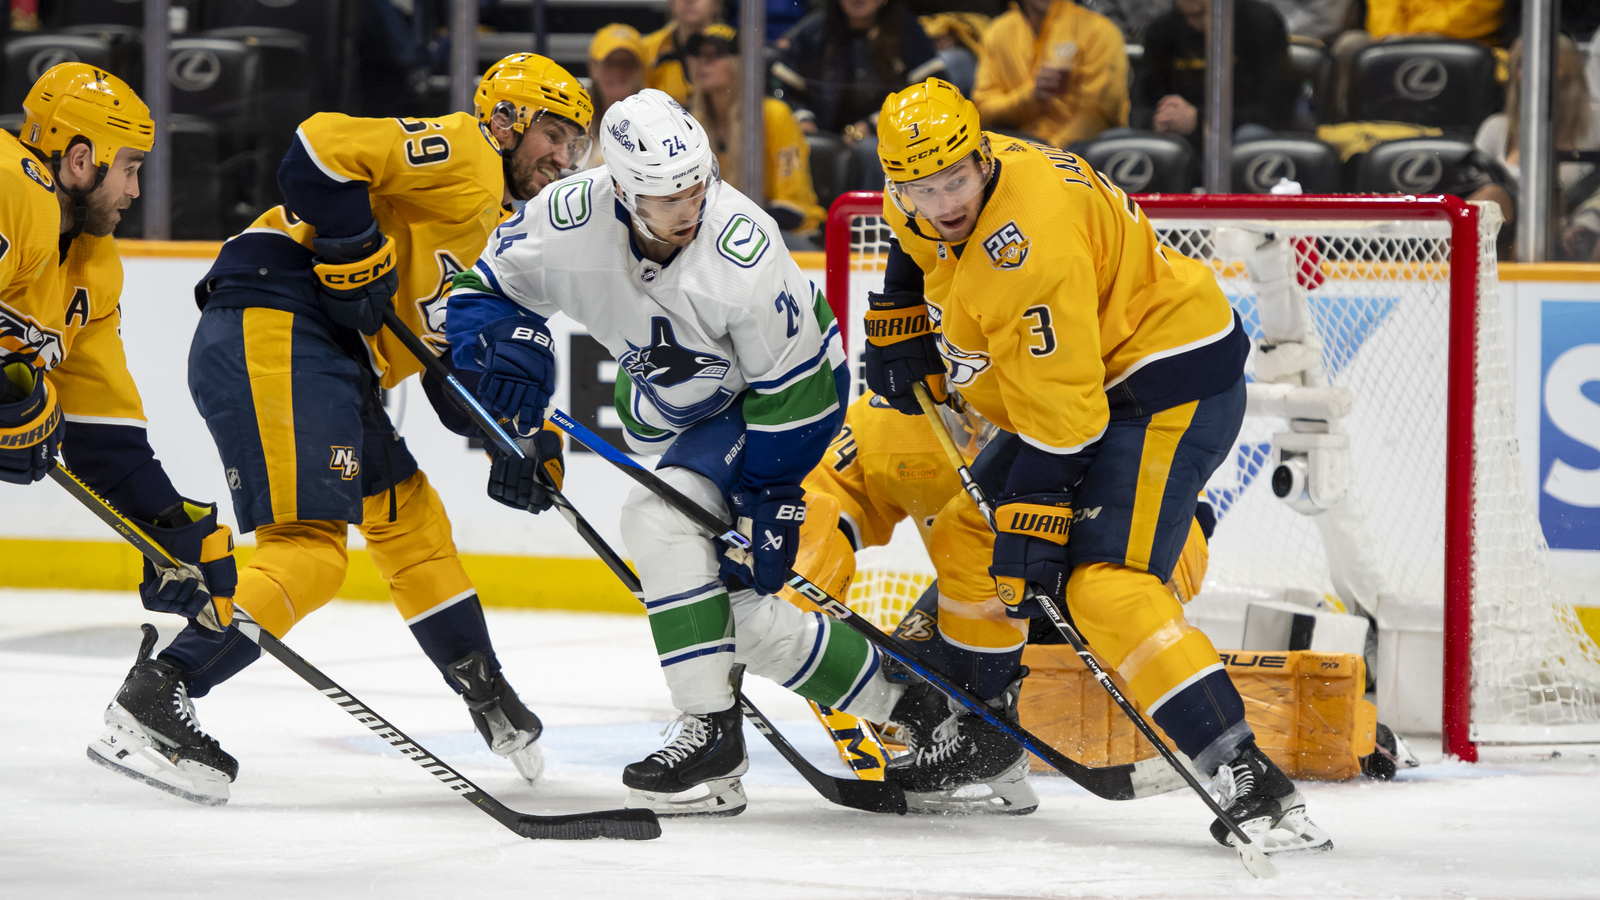 The Real Canucks Came to Play in Game 6 Win vs. Predators